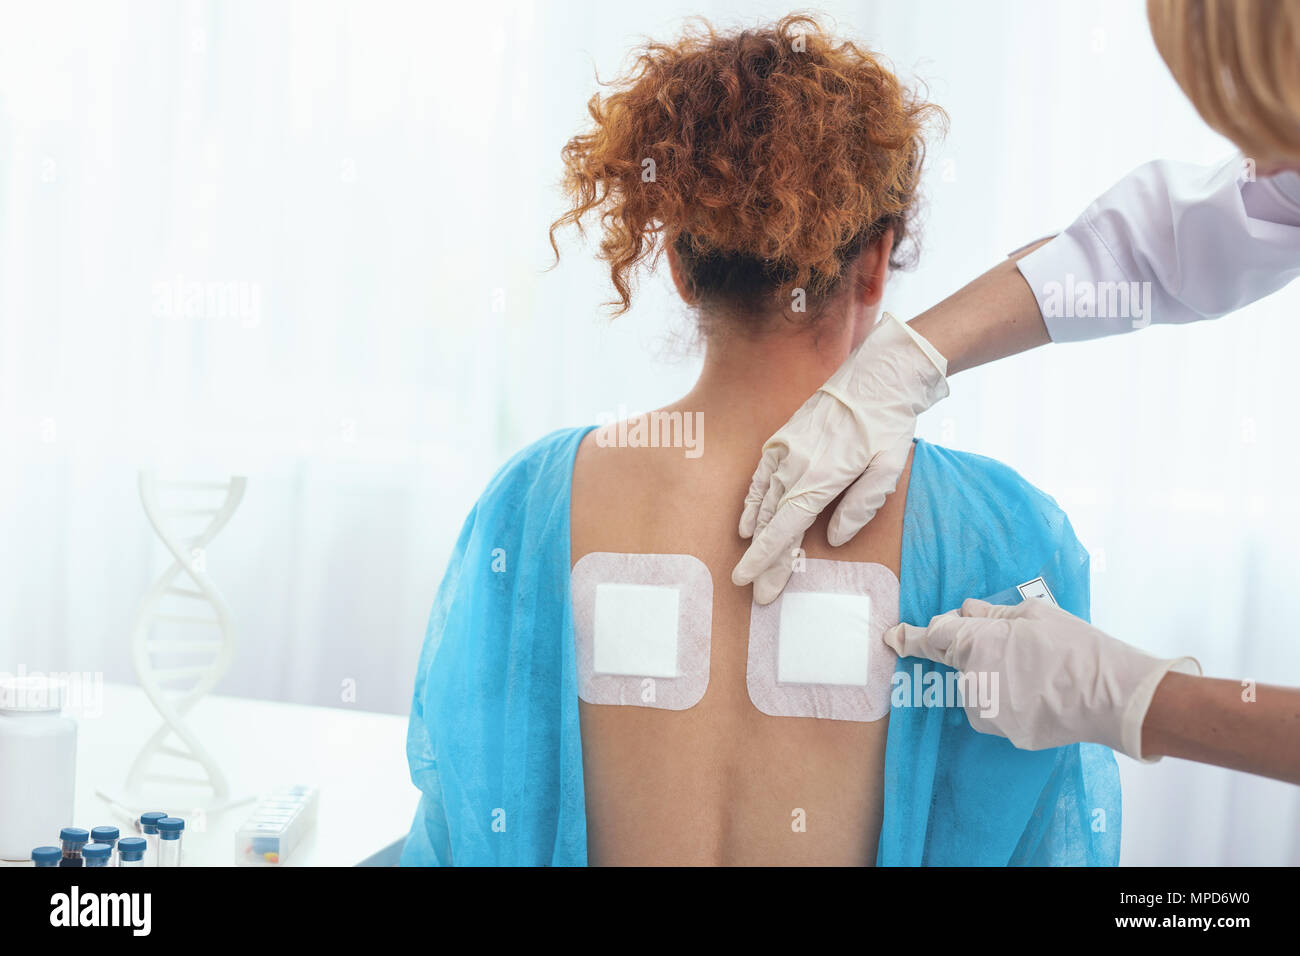 Young girl being offered heat plasters for pain relief Stock Photo